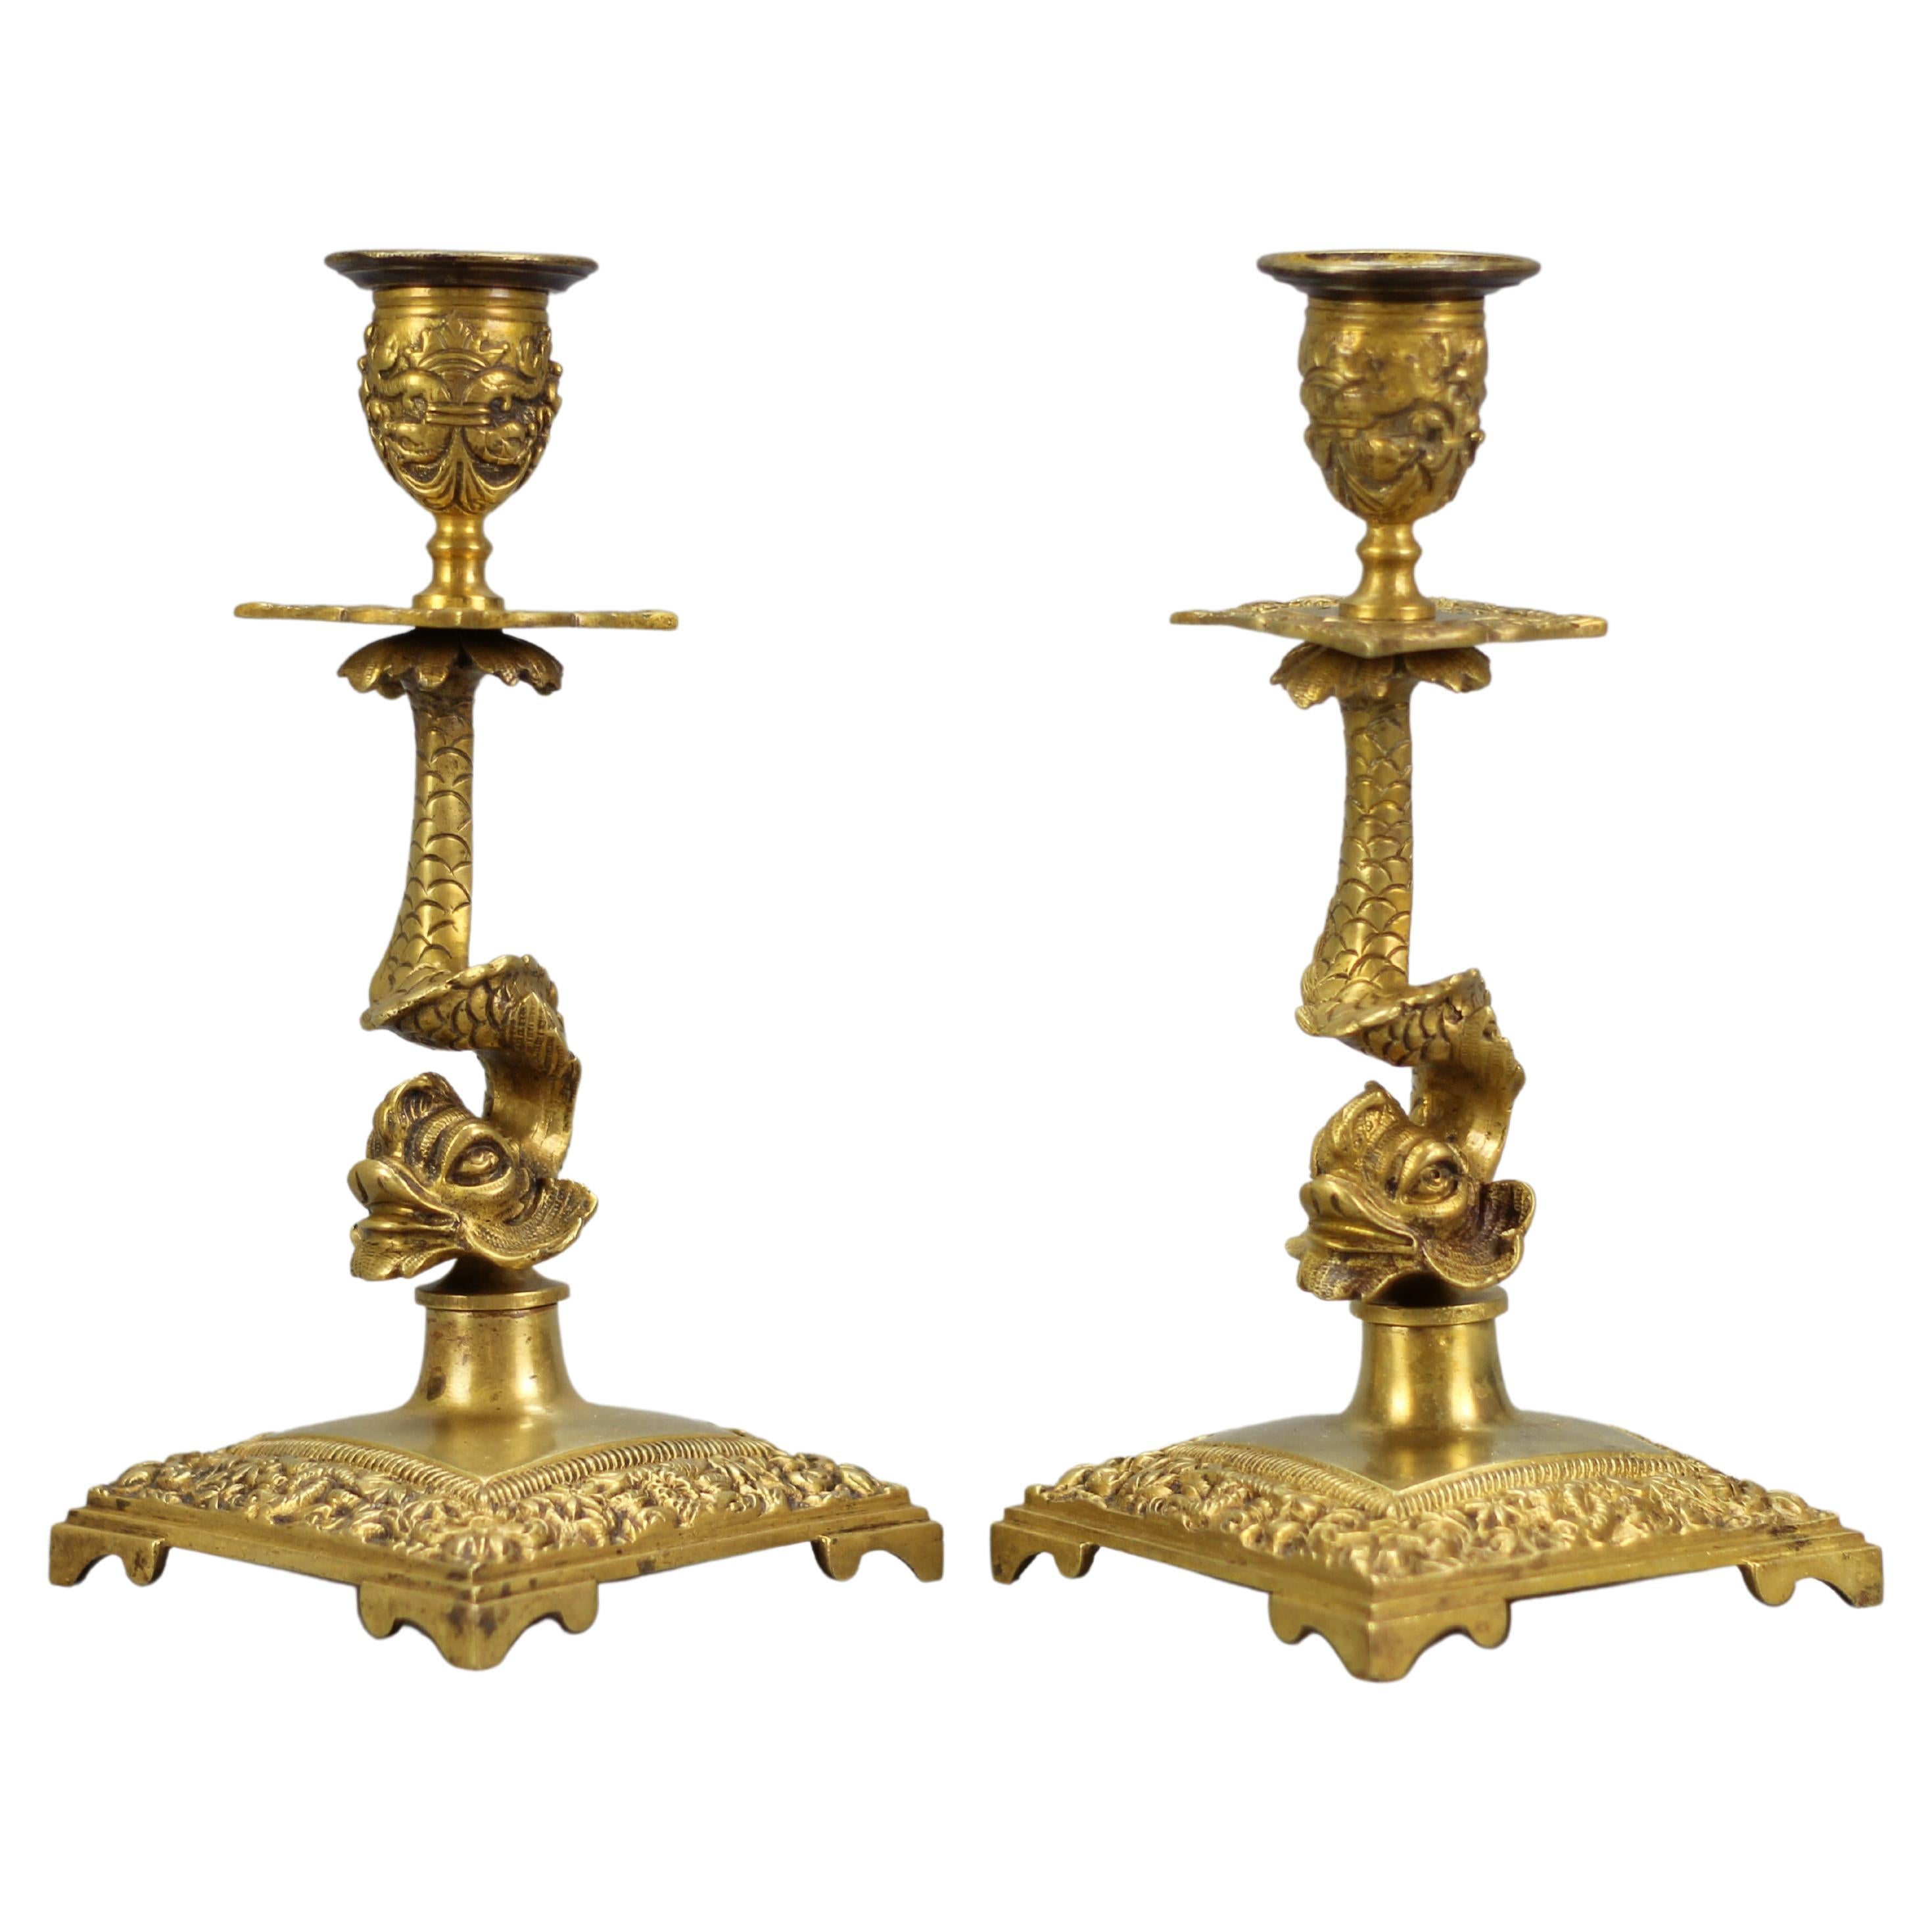 Pair of French Bronze Candlesticks with Dolphin Figures